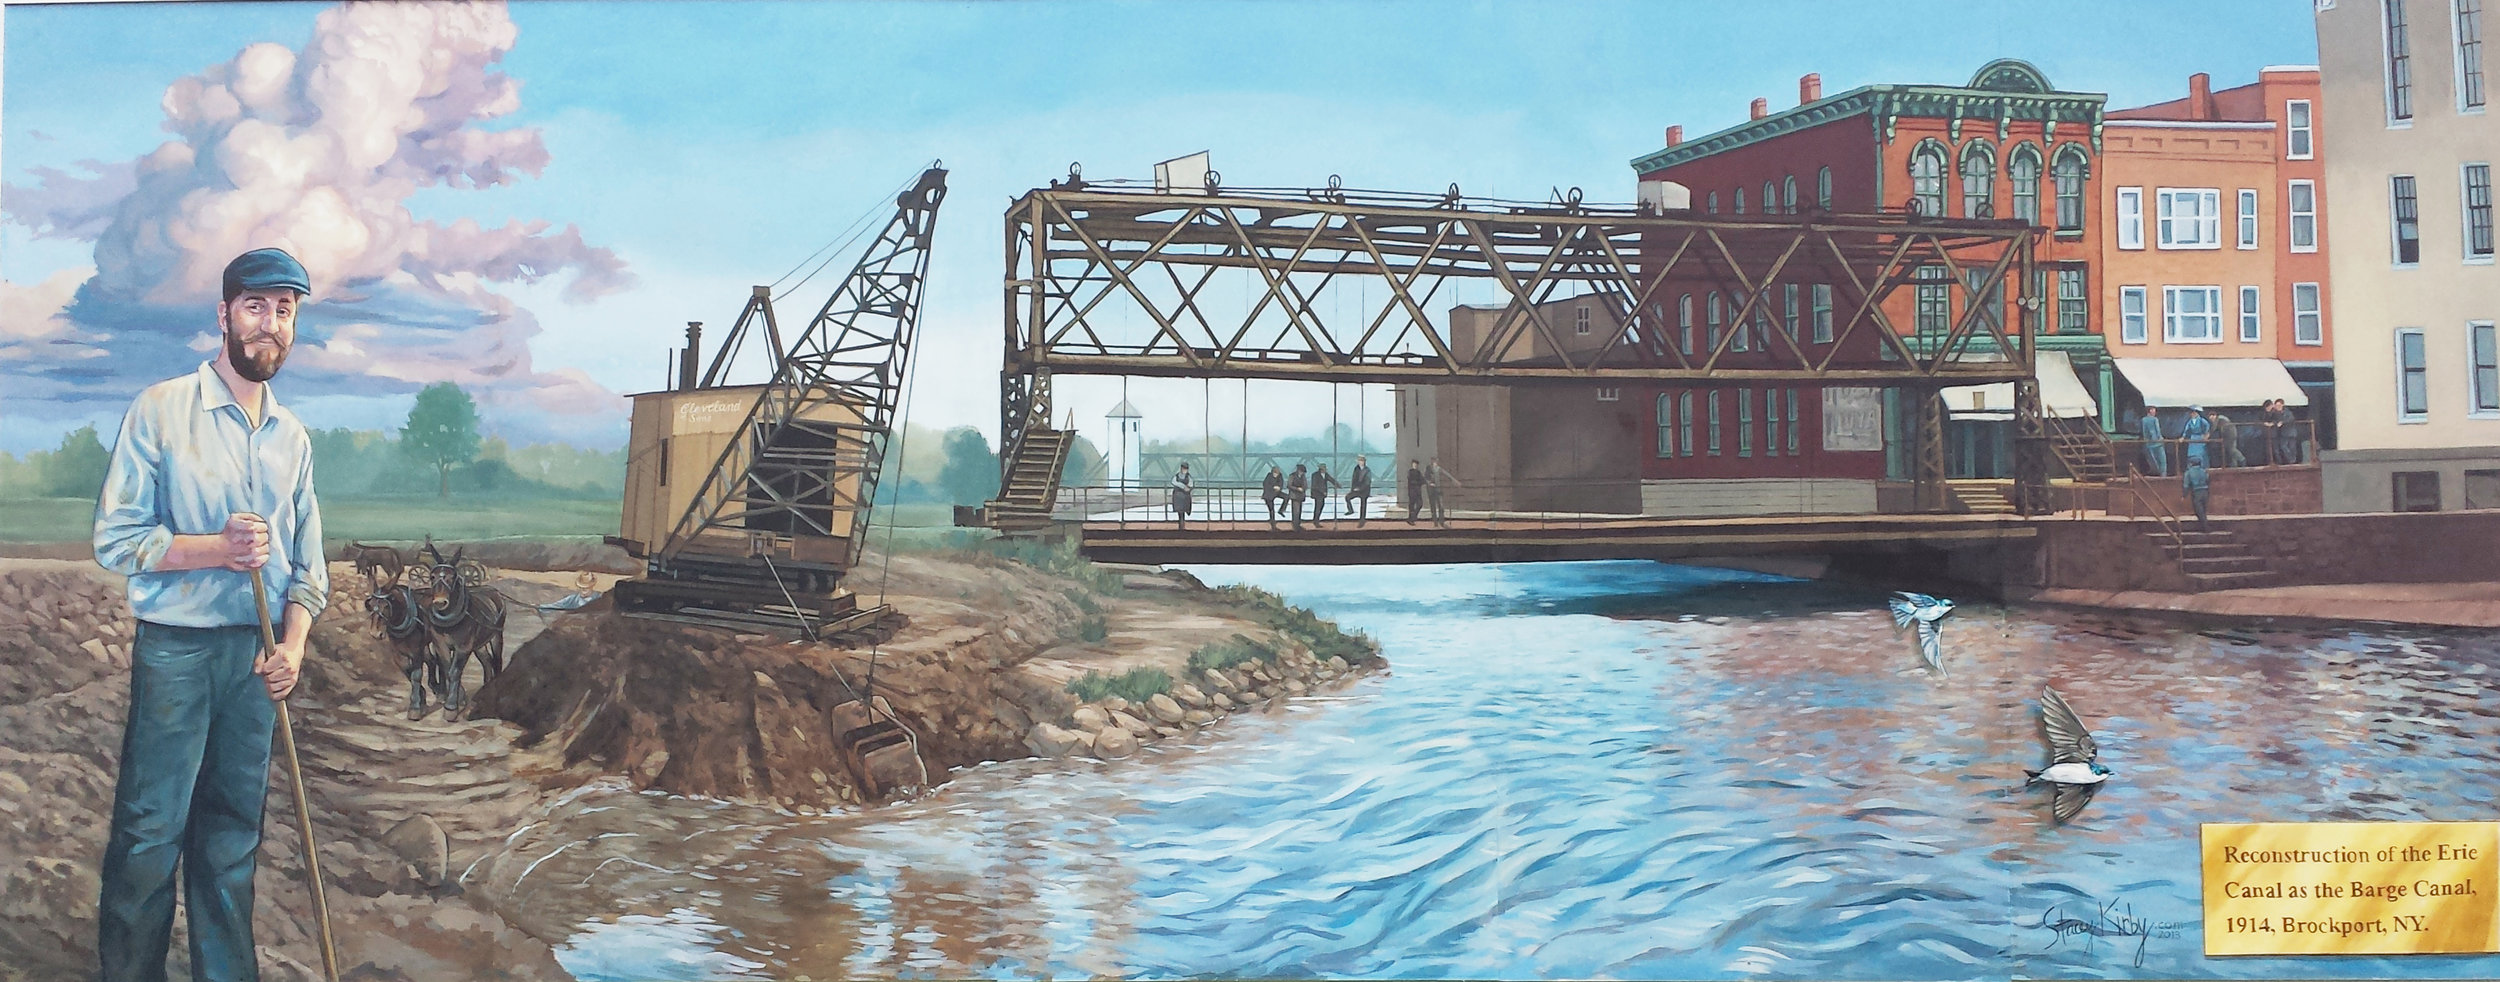 Expansion of the Erie Canal